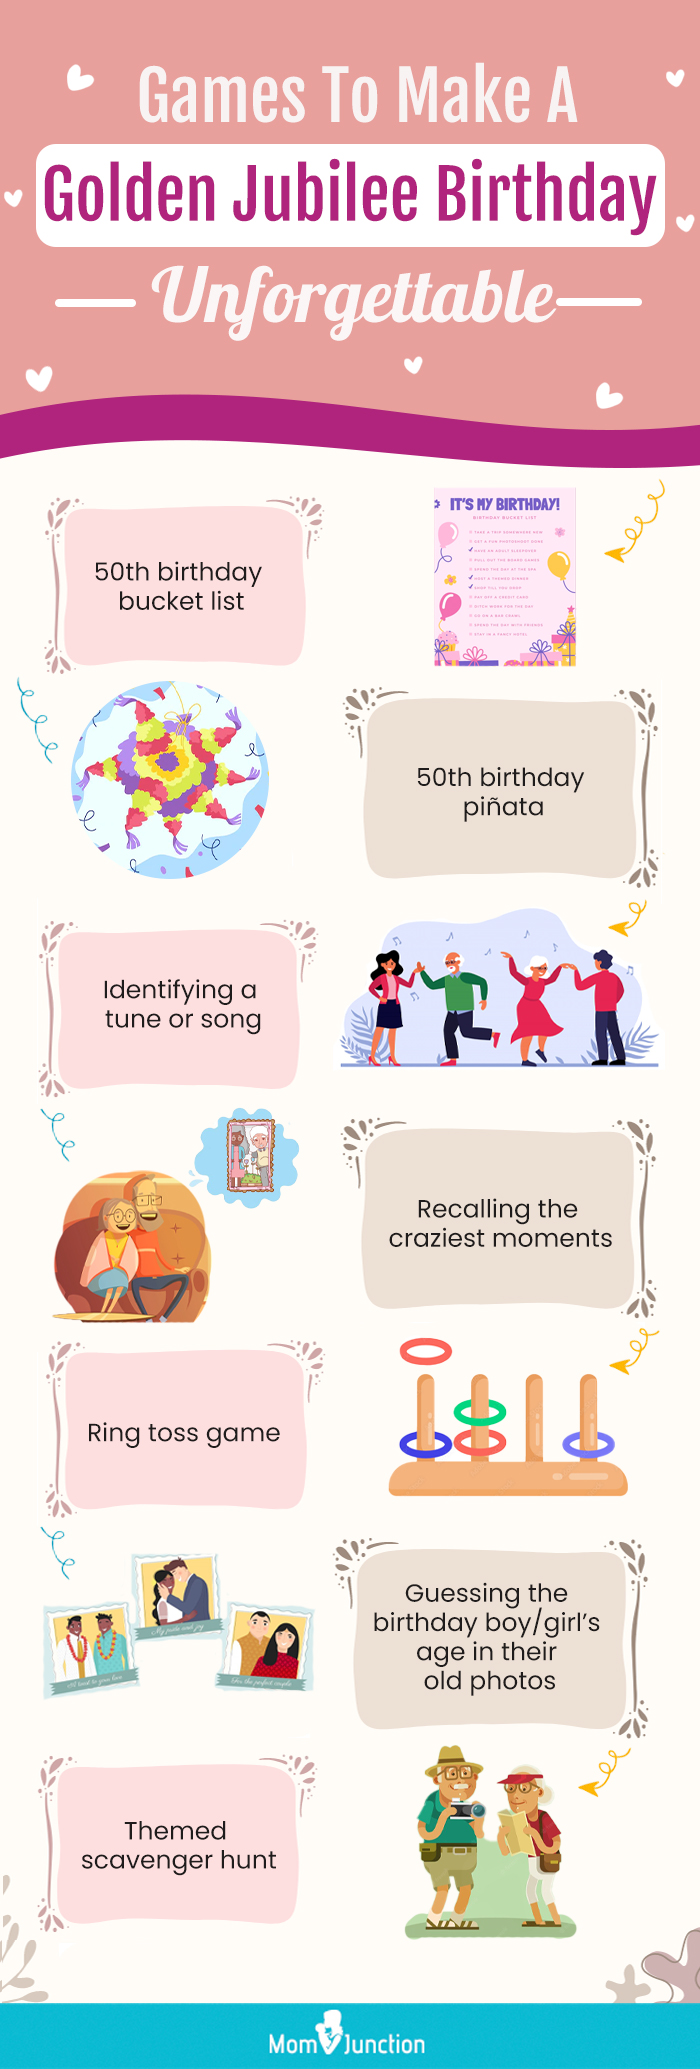 games to make a golden jubilee birthday unforgettable (infographic)